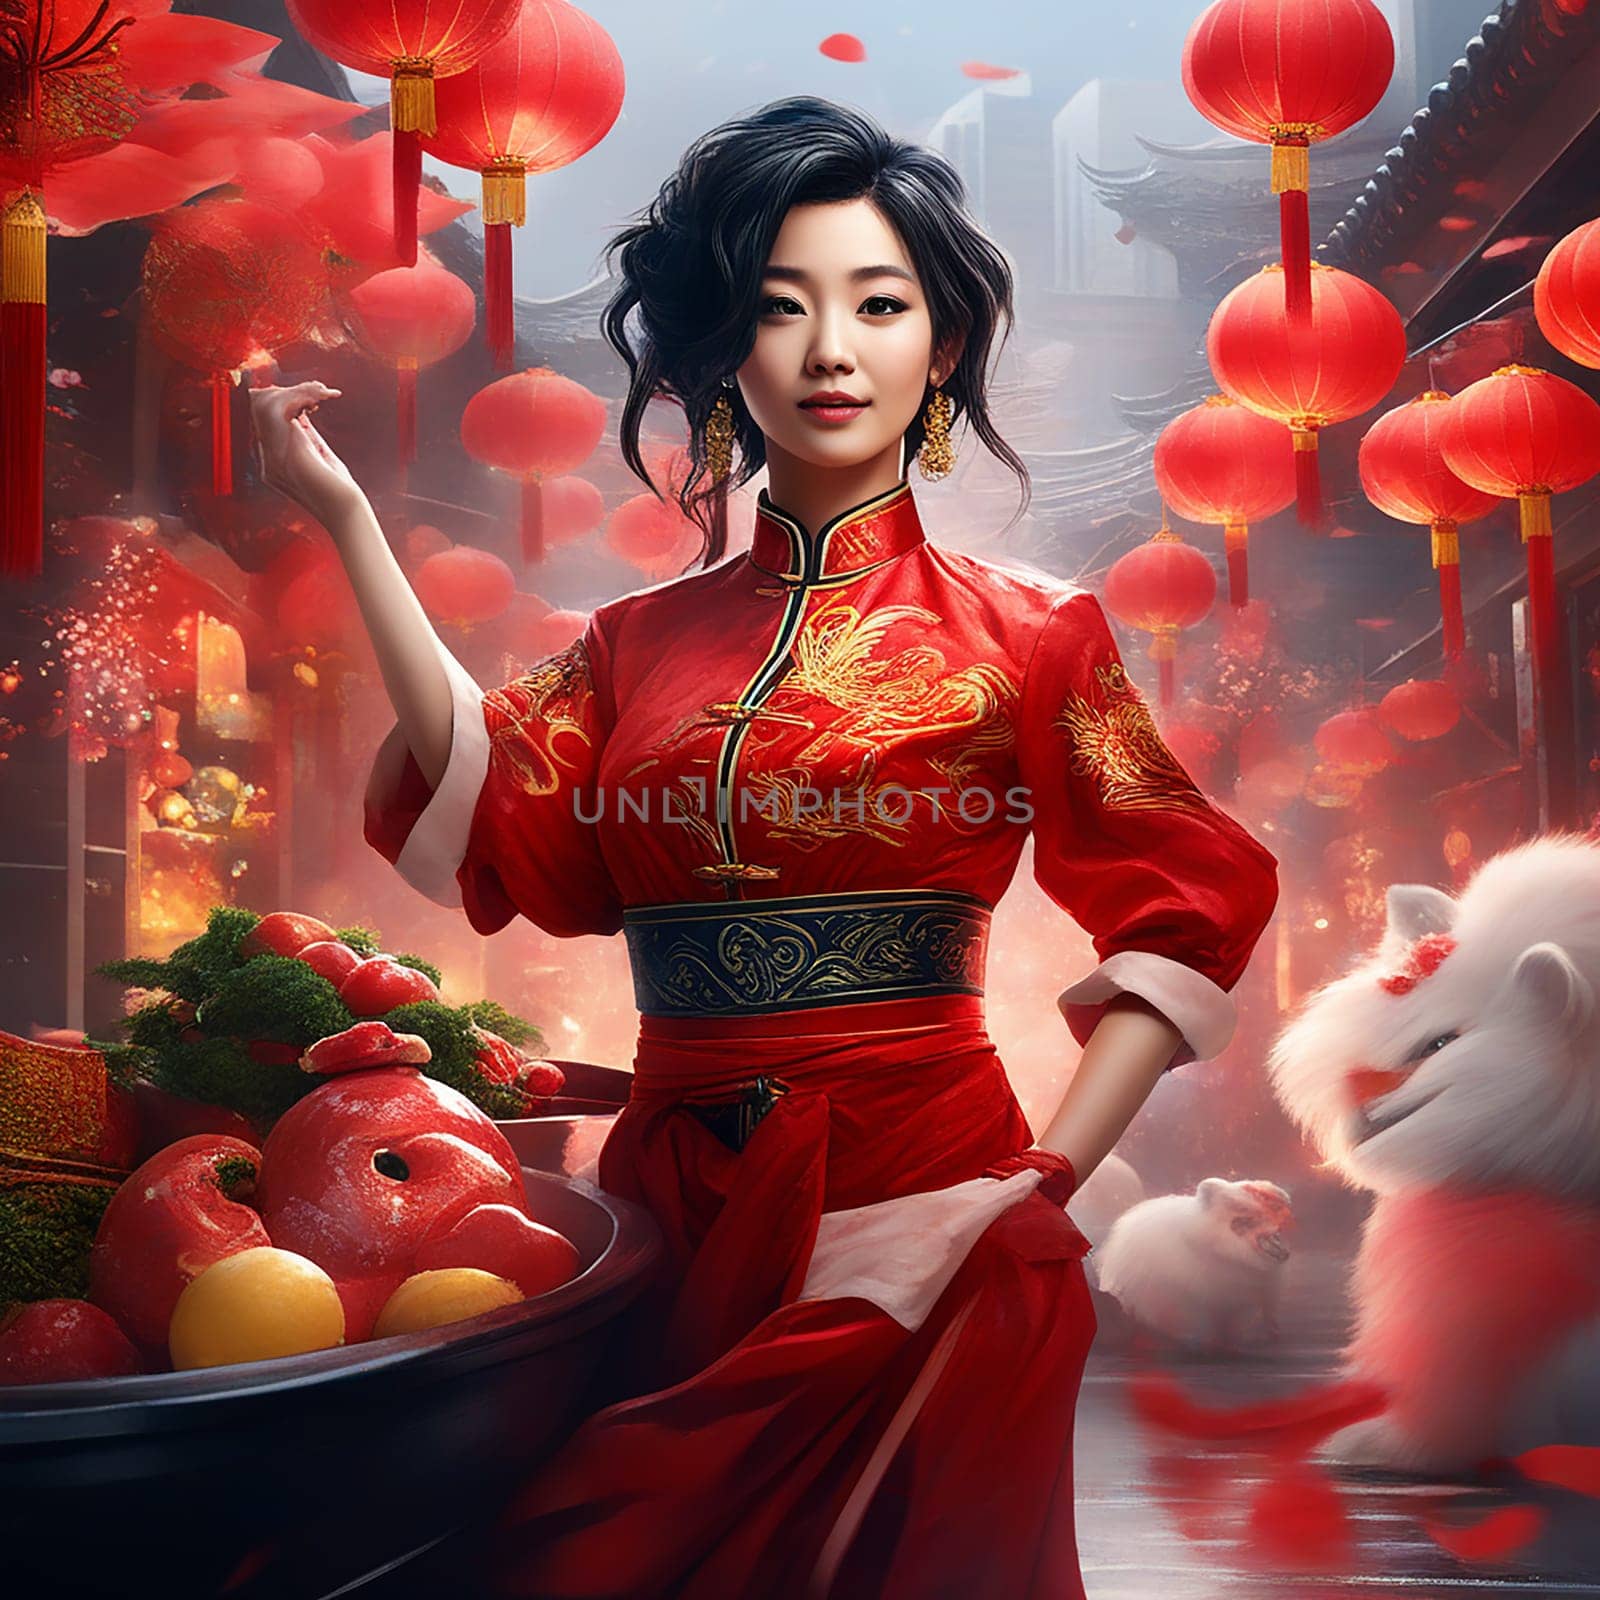 Girl Wishing You a Happy Chinese New Year by Petrichor